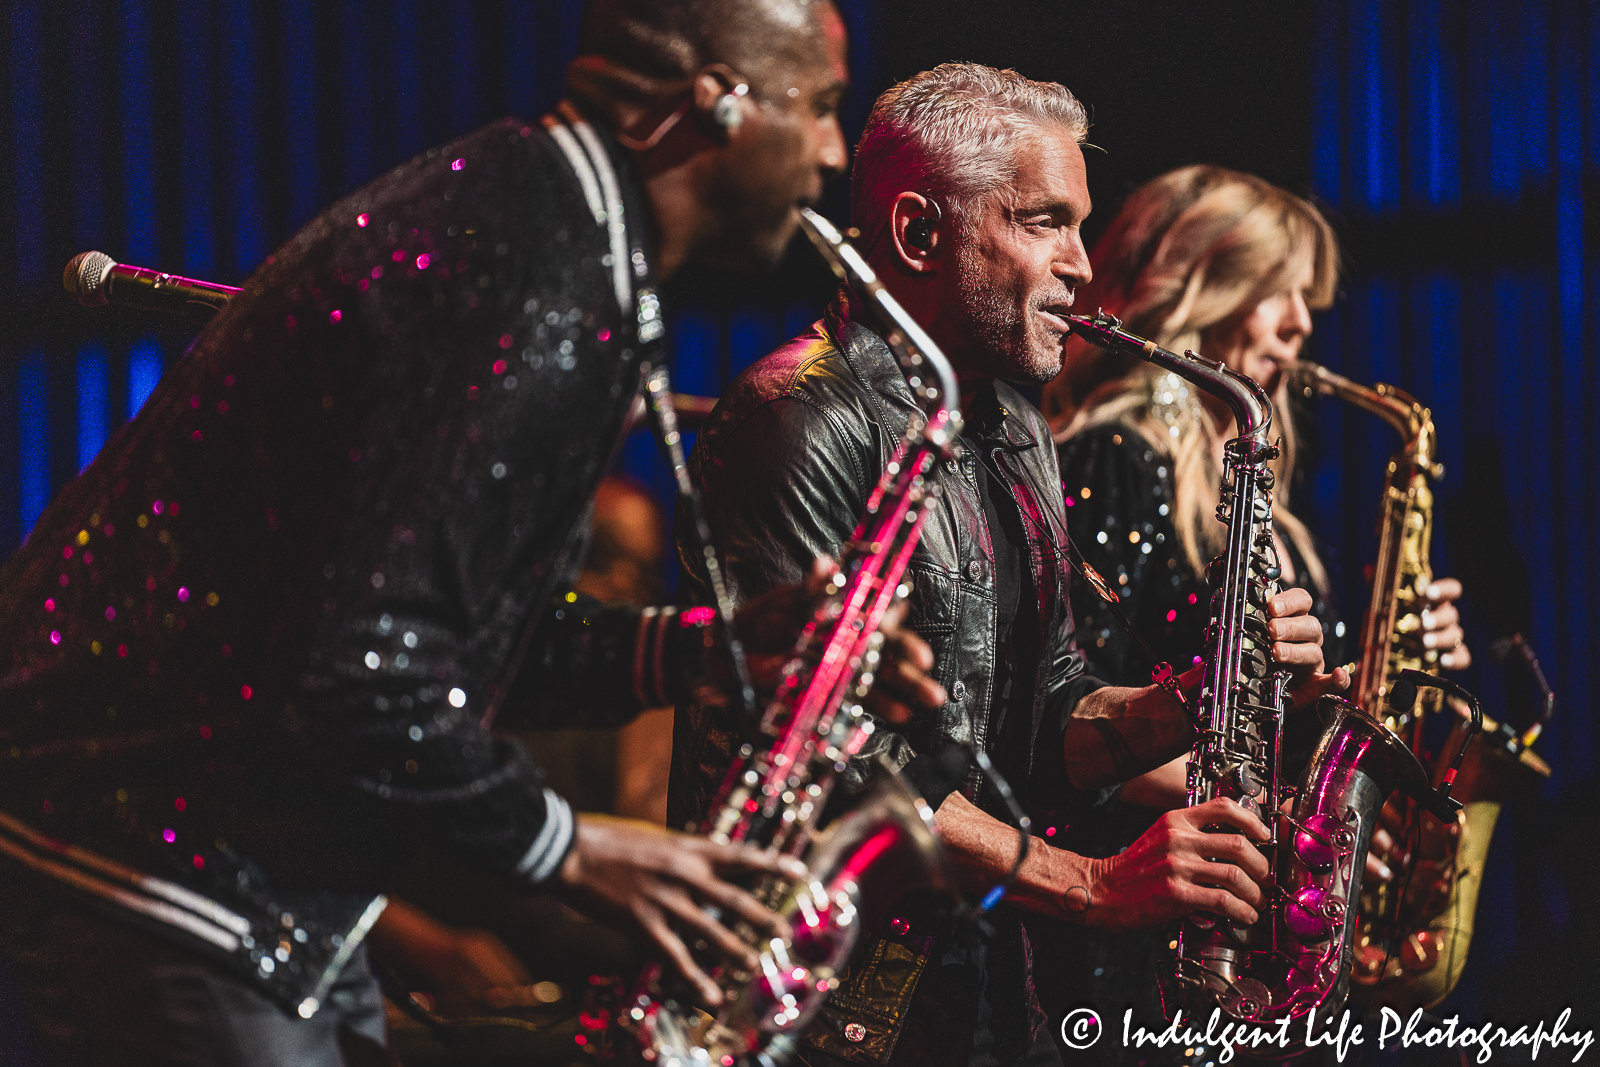 Saxophone players Eric Darius, Dave Koz and Candy Dulfer live in concert together at Kauffman Center for the Performing Arts in downtown Kansas City, MO on July 15, 2023.